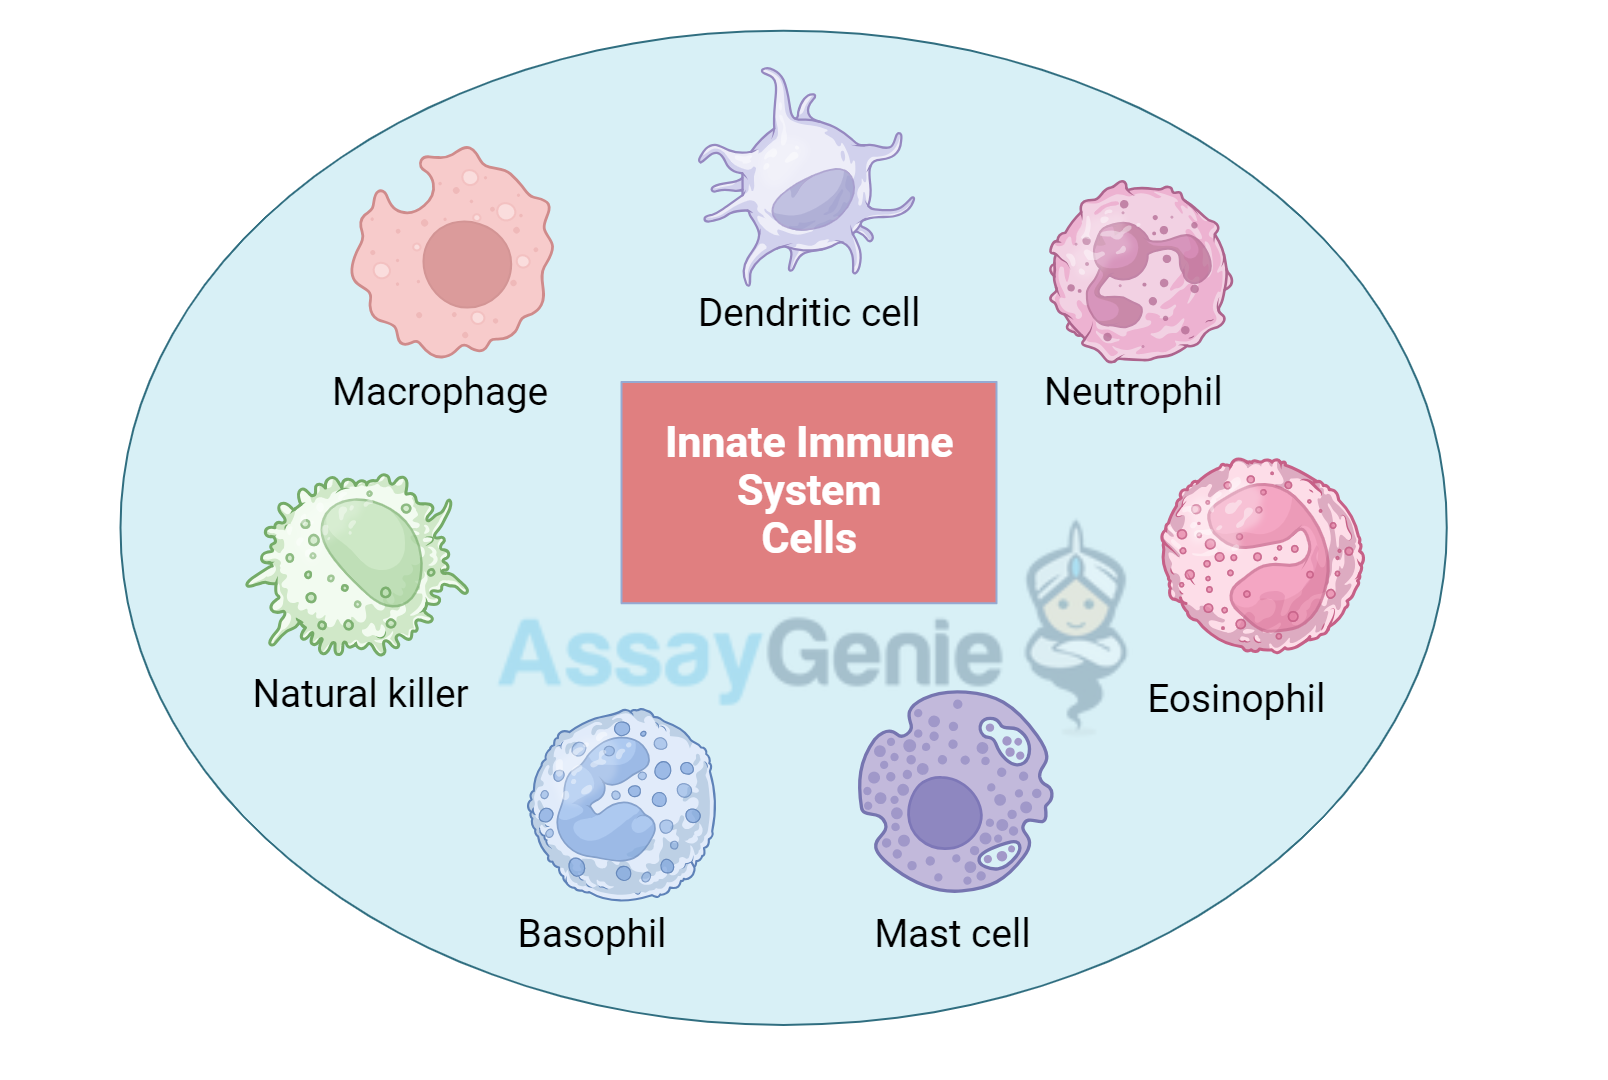 Innate Immune System Cells: An In-depth Overview